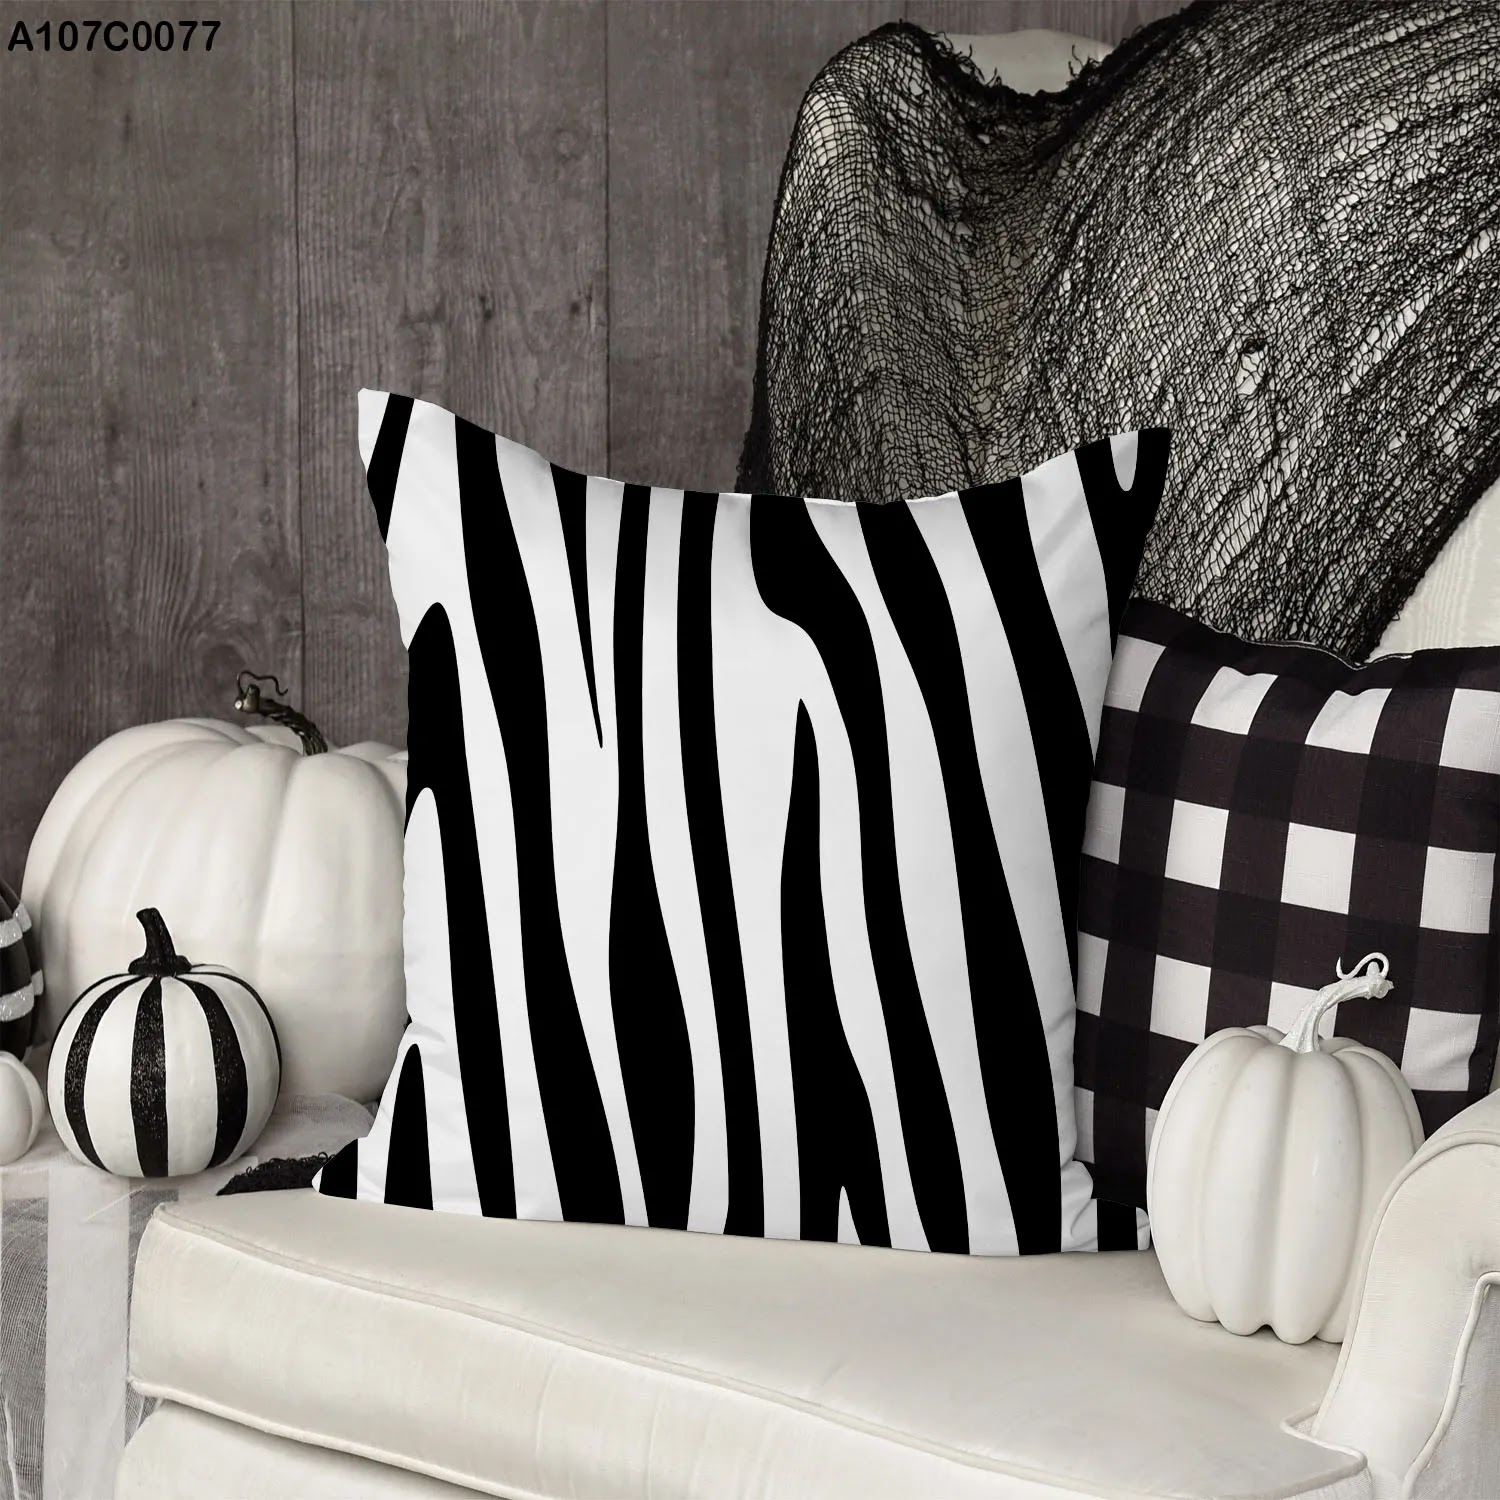 Black and white striped pillow case